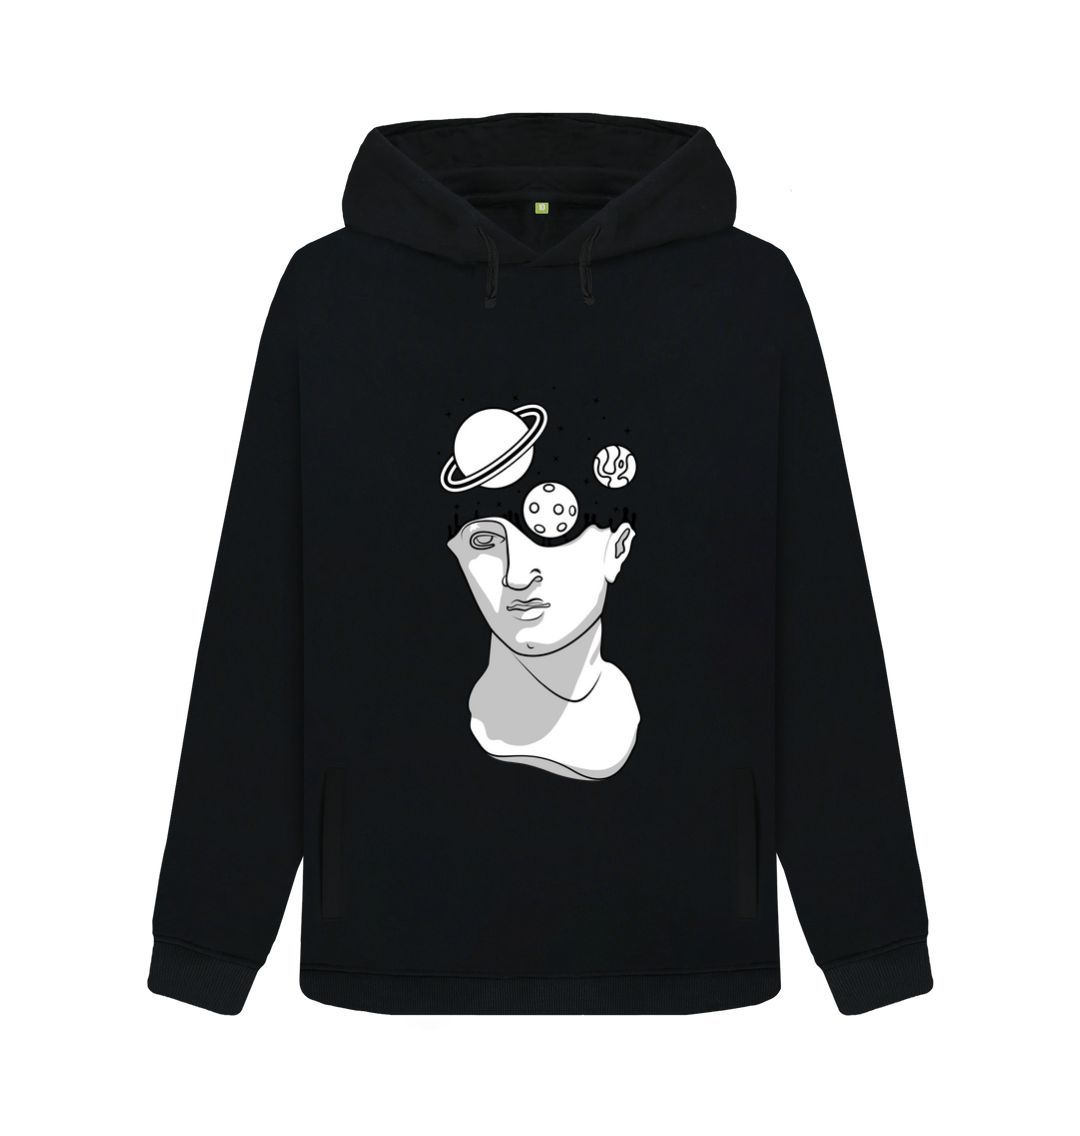 Black Do Space Hoodie Pullover